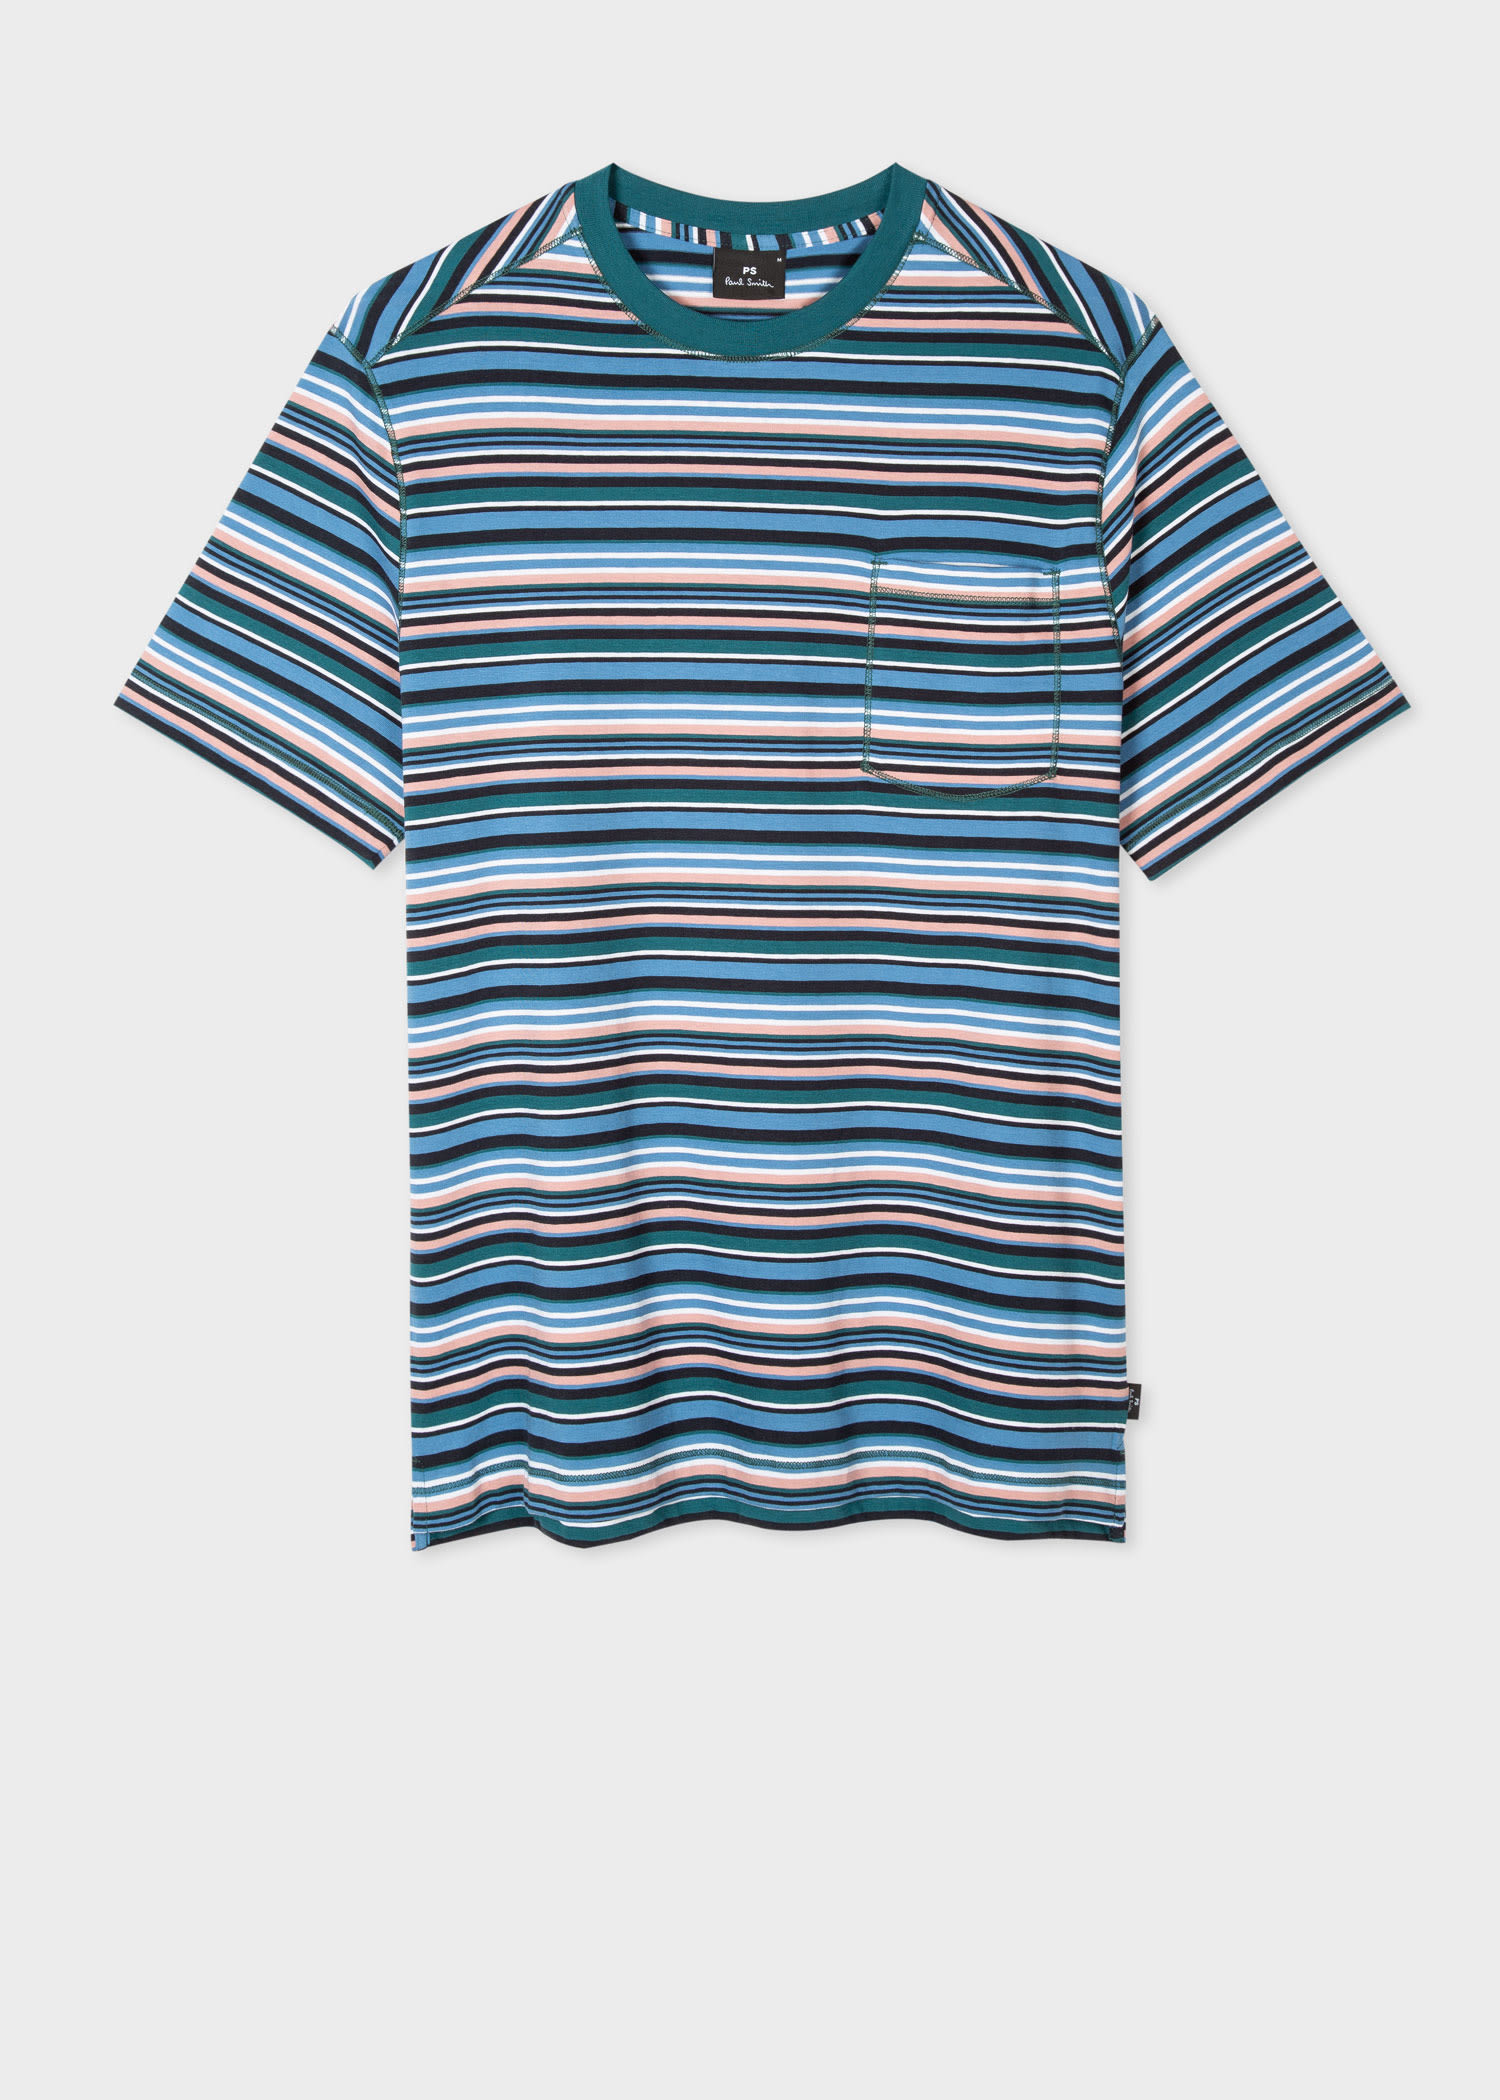 PS Paul Smith Collection For Men - Paul Smith US